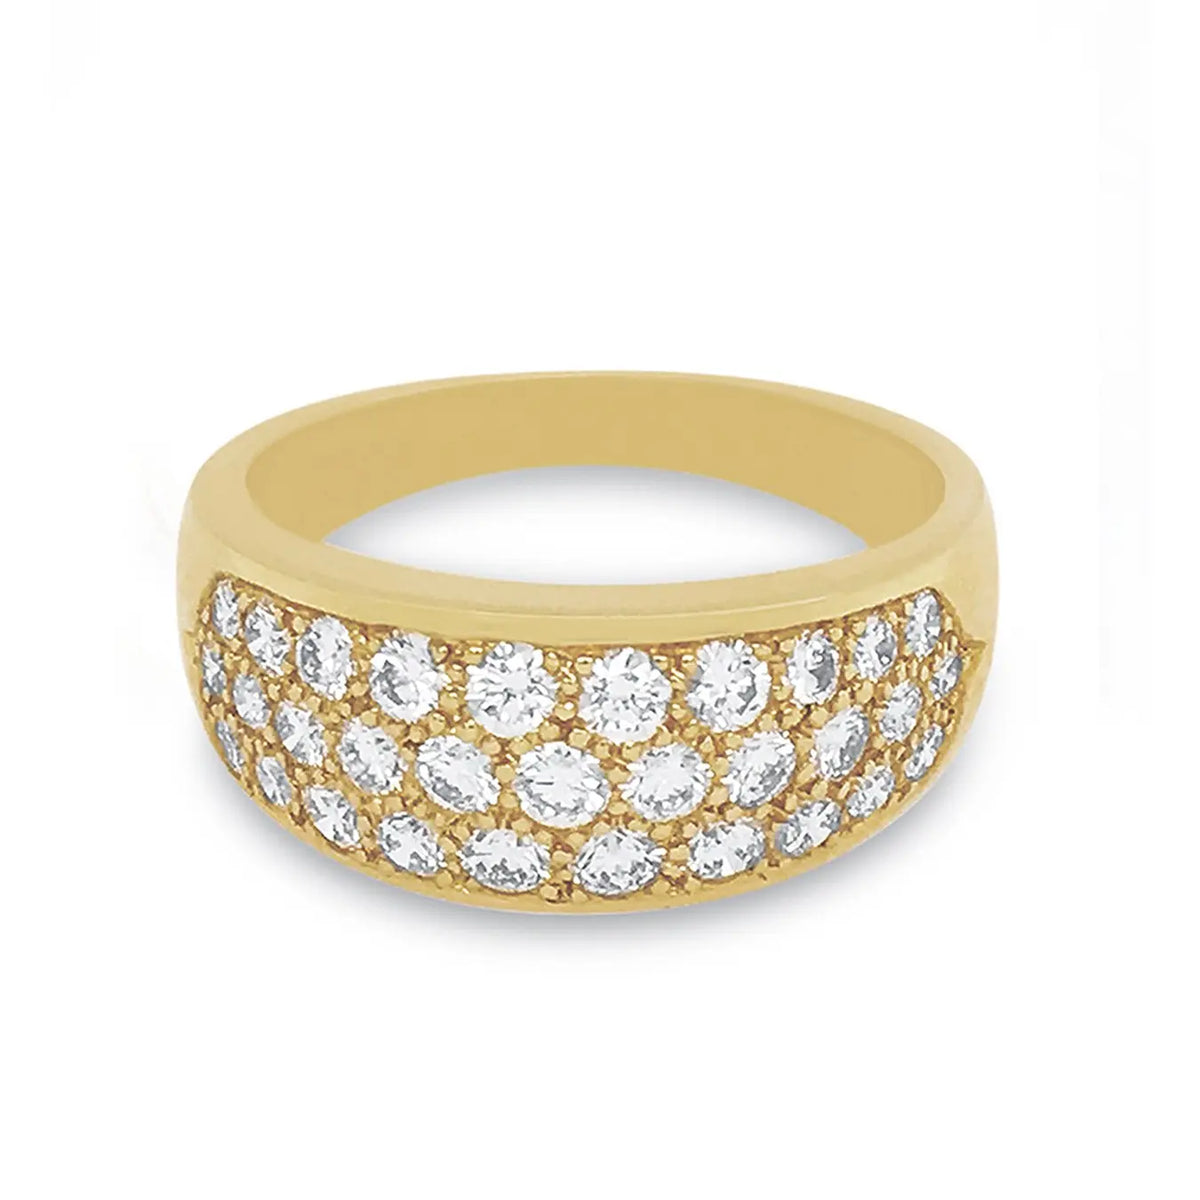 Pave Diamond Band Ring In Yellow Gold - Squash Blossom Vail